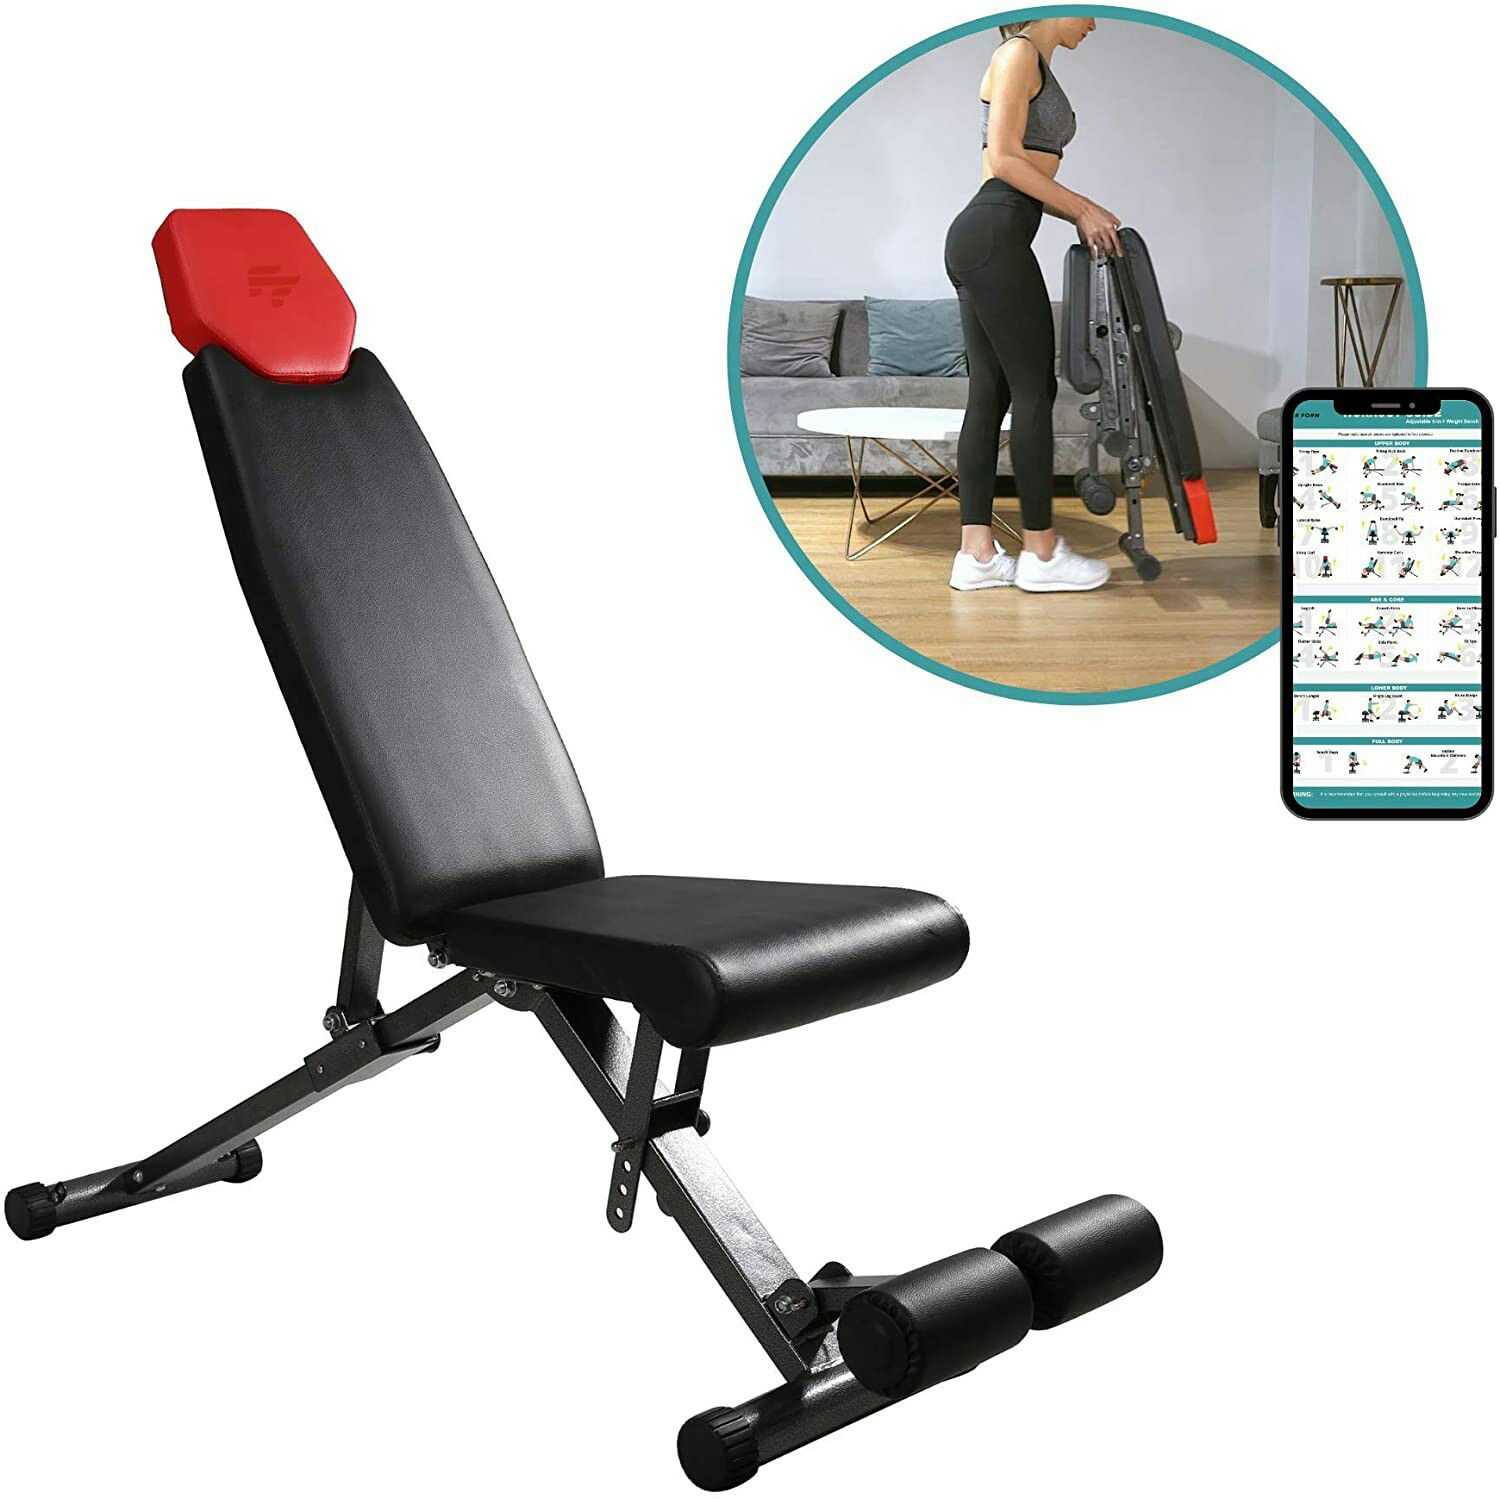 5-in-1 Adjustable Weight Bench